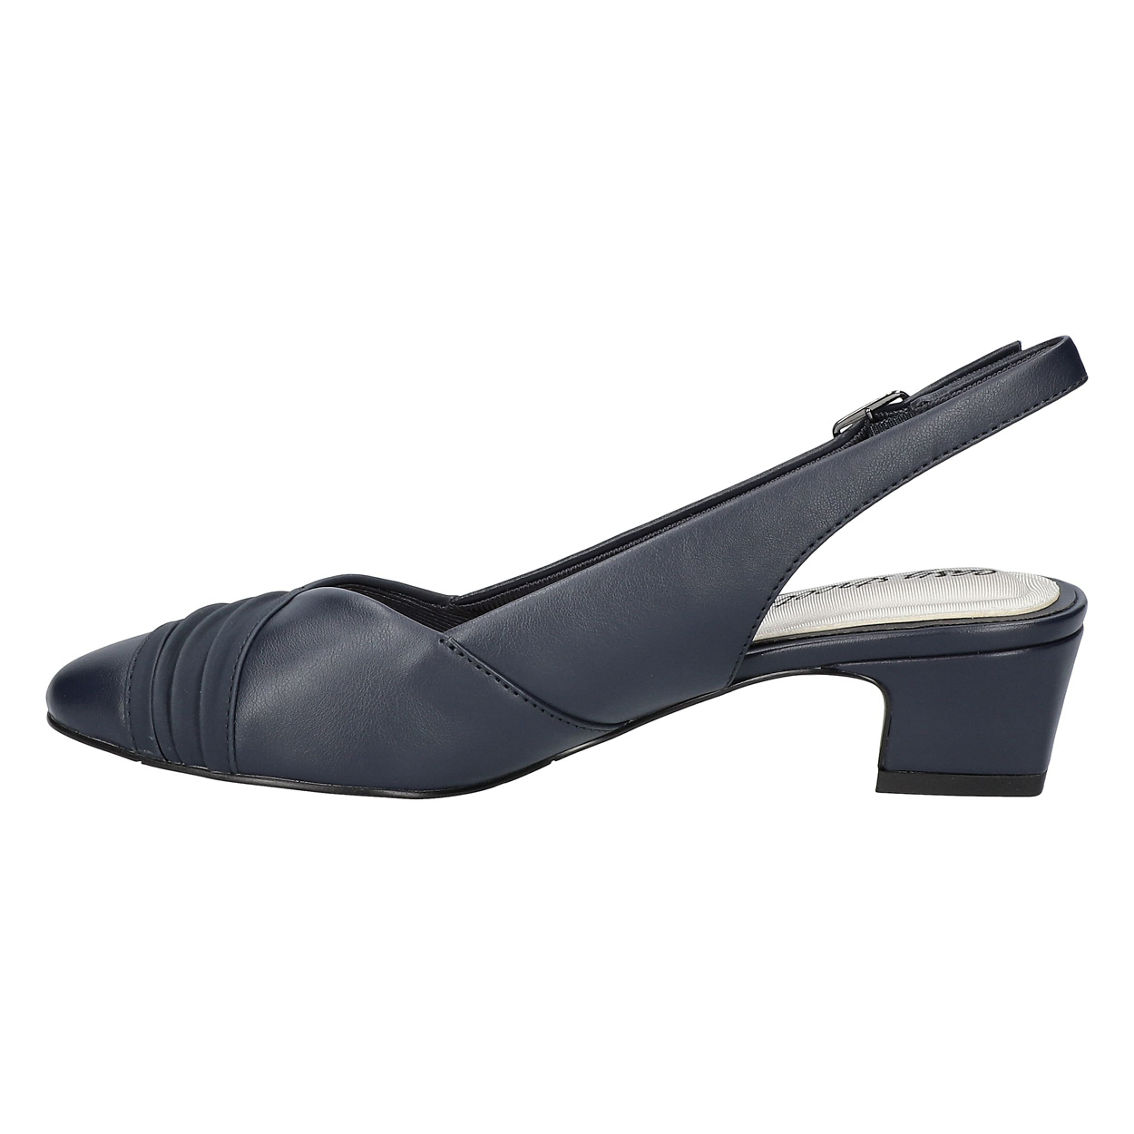 Bates by Easy Street Slingback Pumps - Image 5 of 5